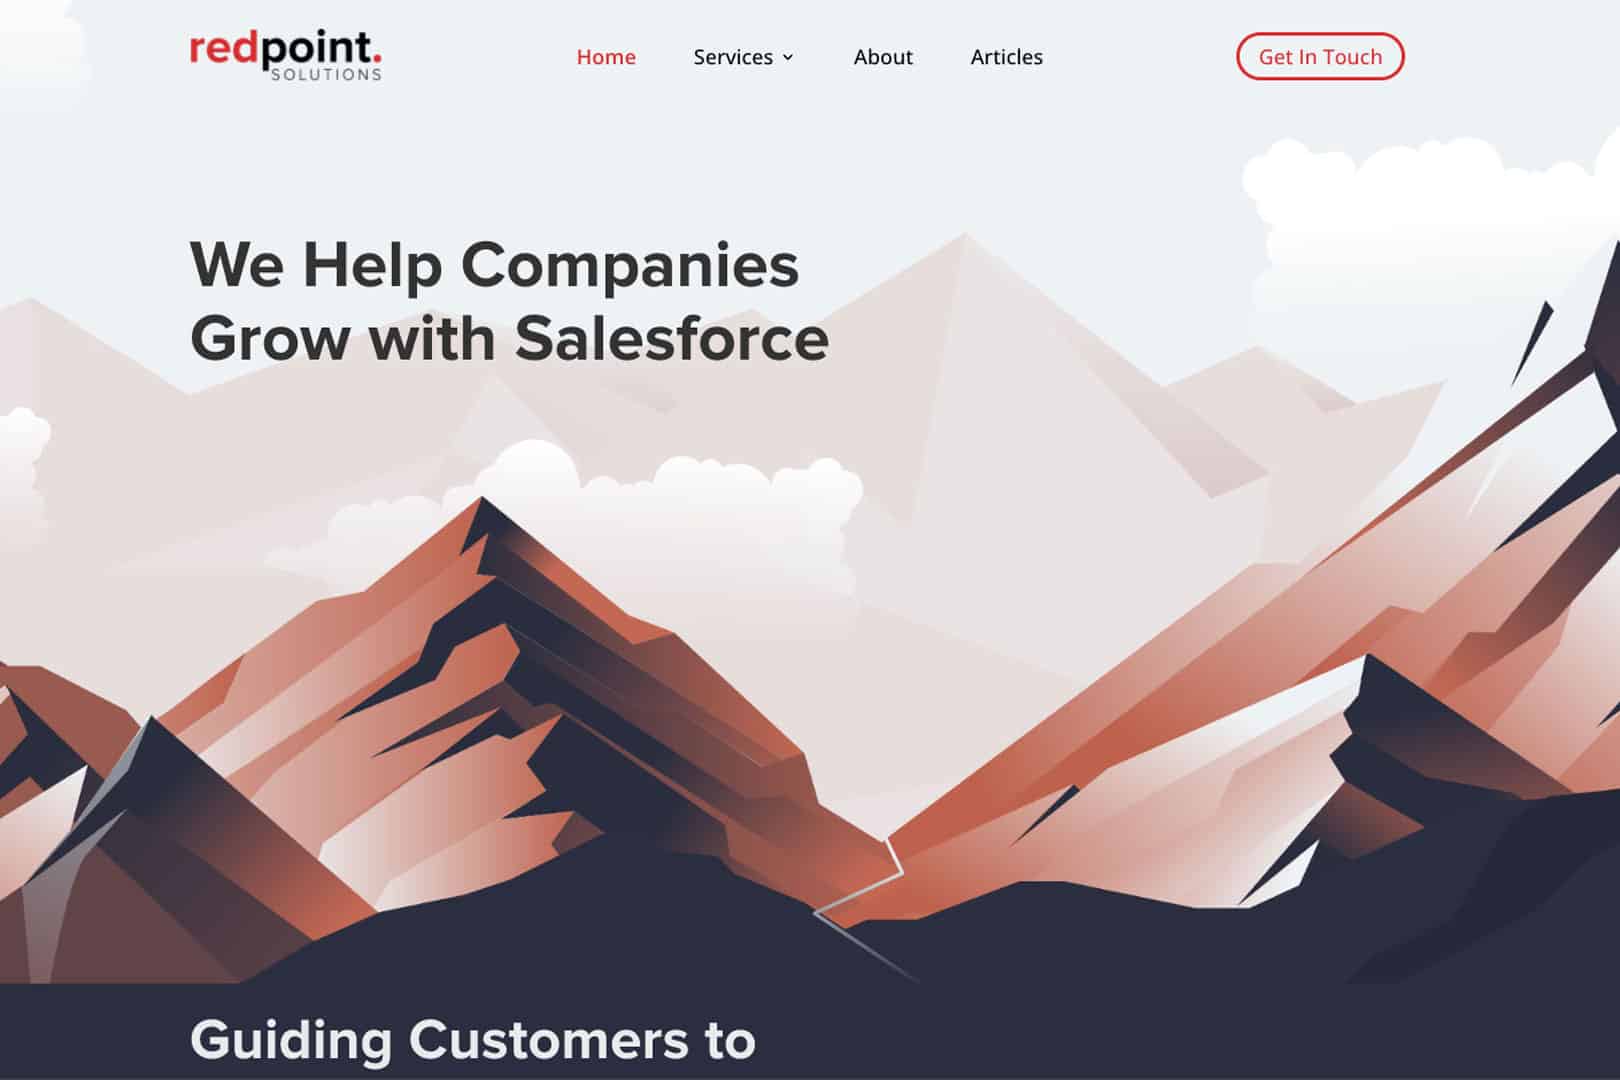 Redpoint home page